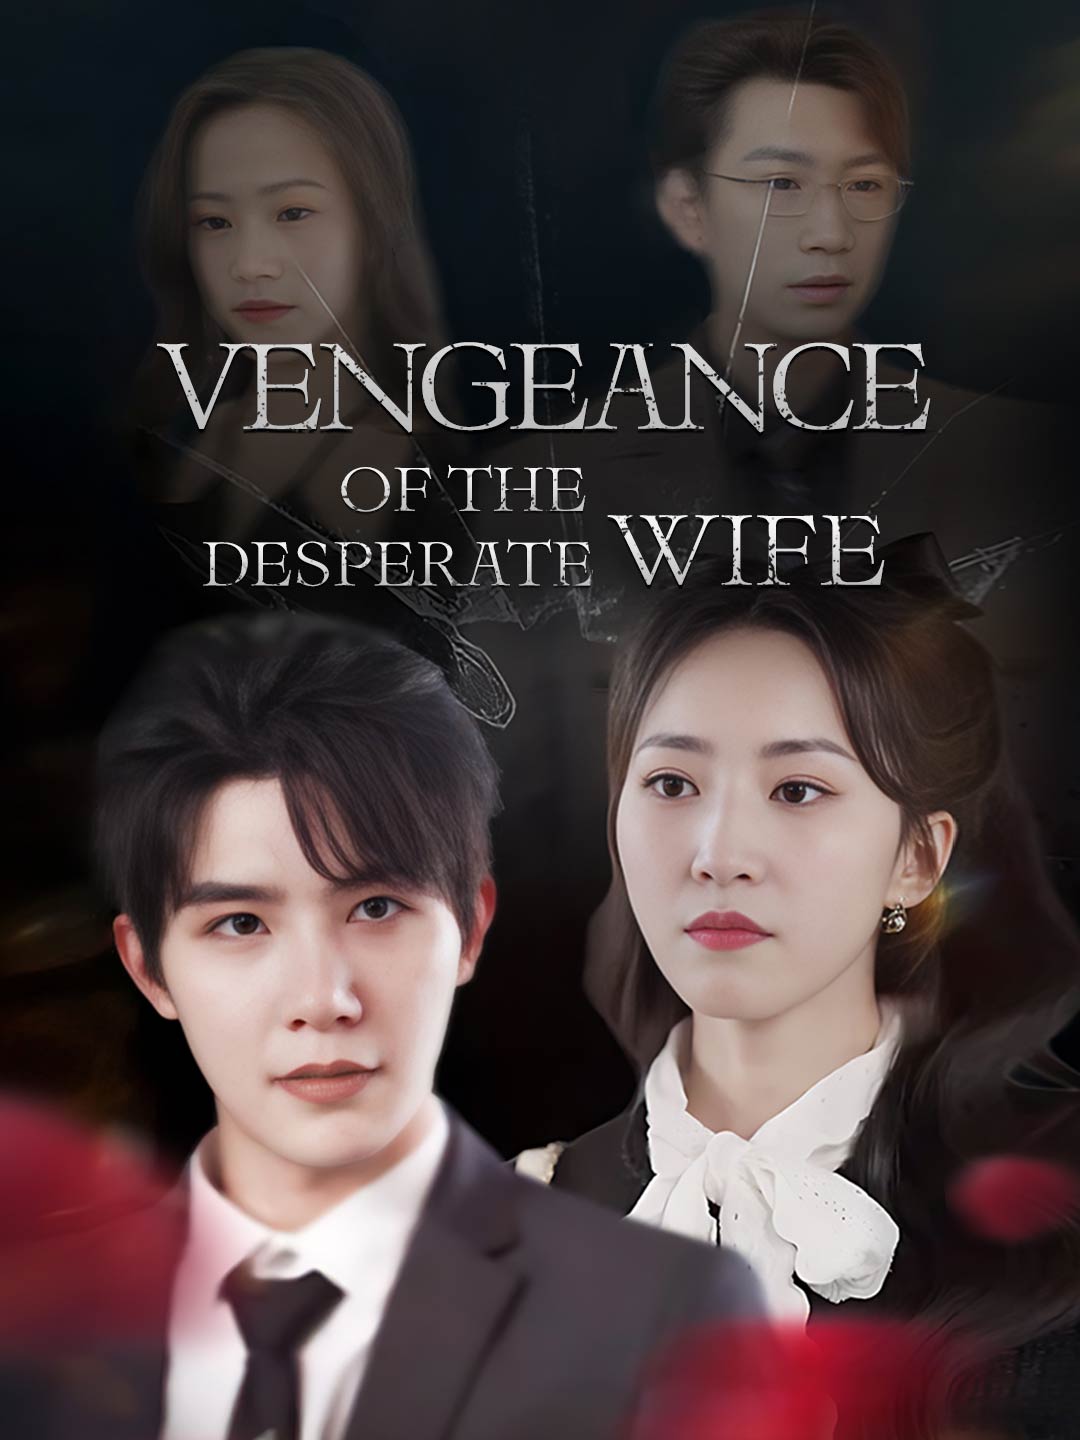 Vengeance of the Desperate Wife